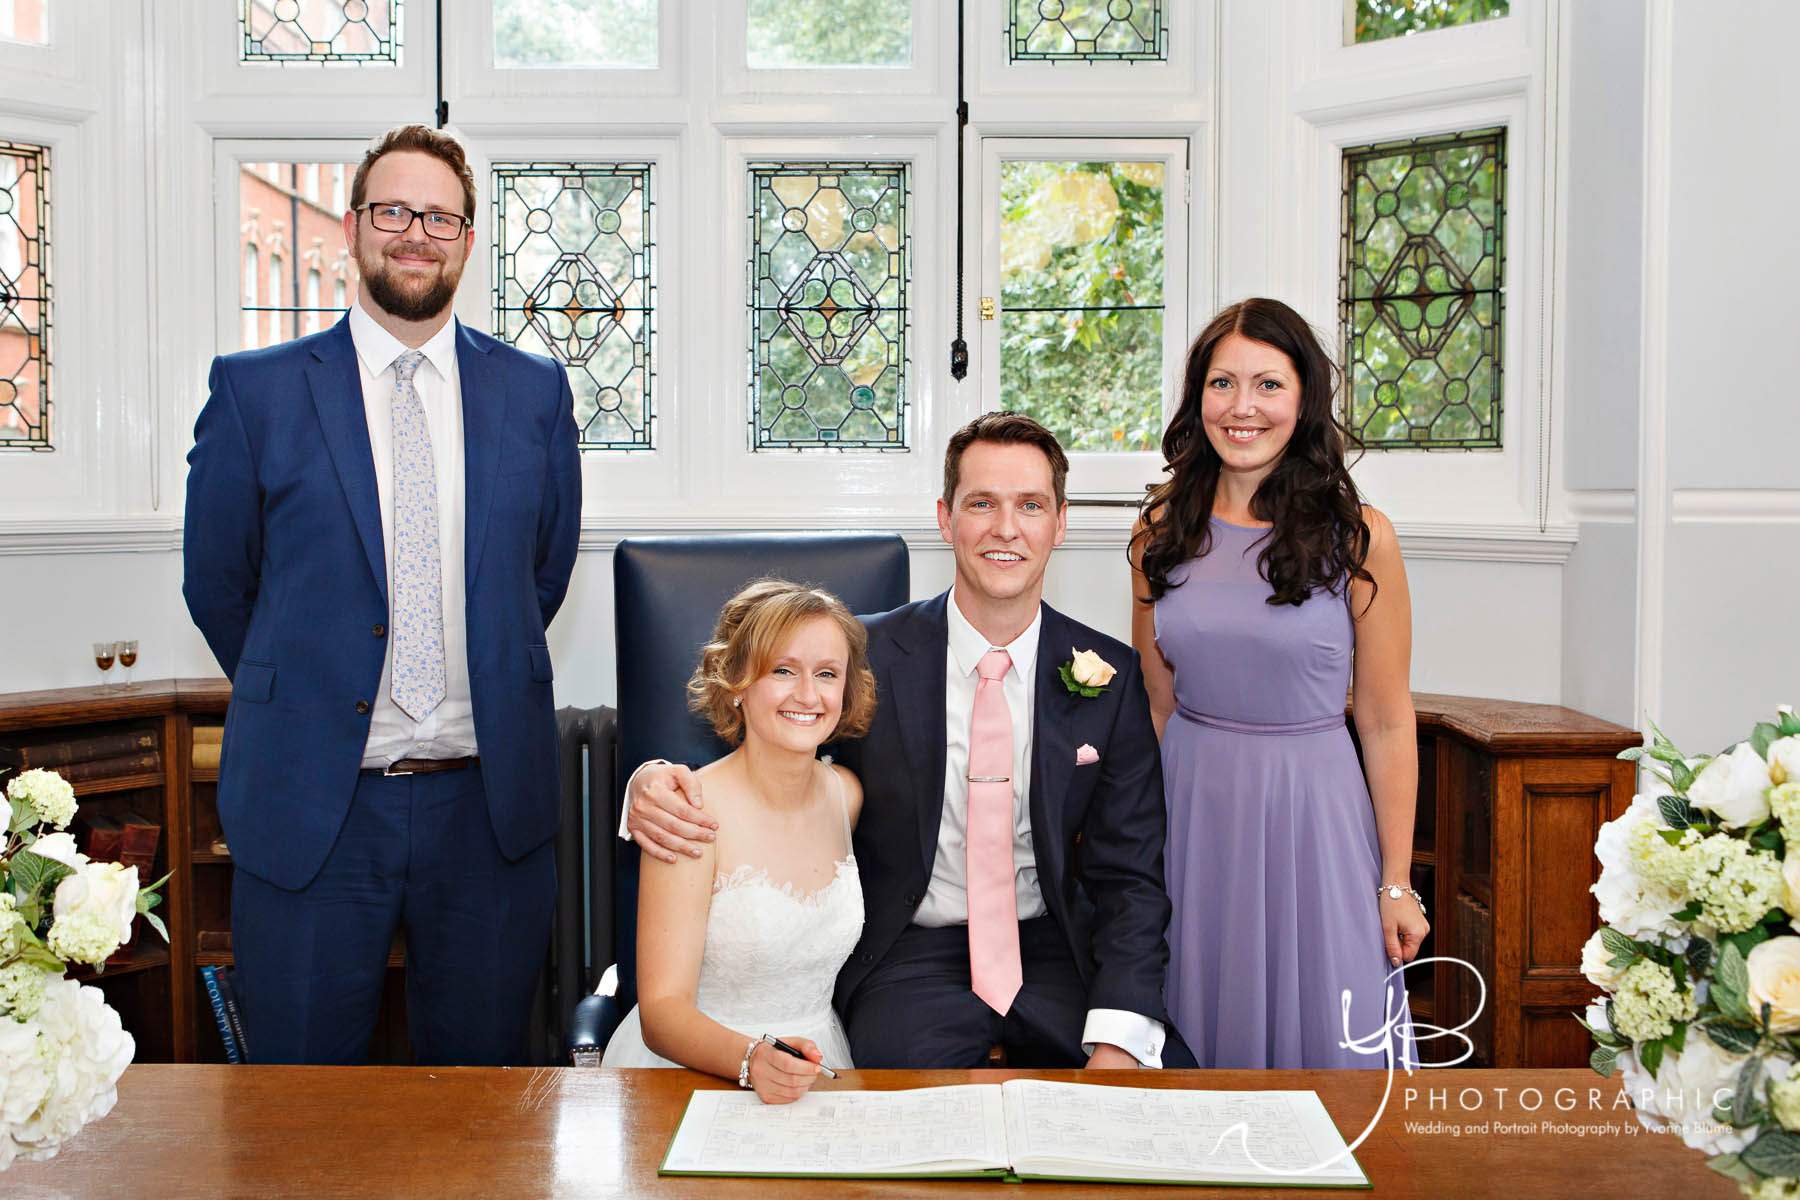 The bride and groom pose with their witness after signing the register